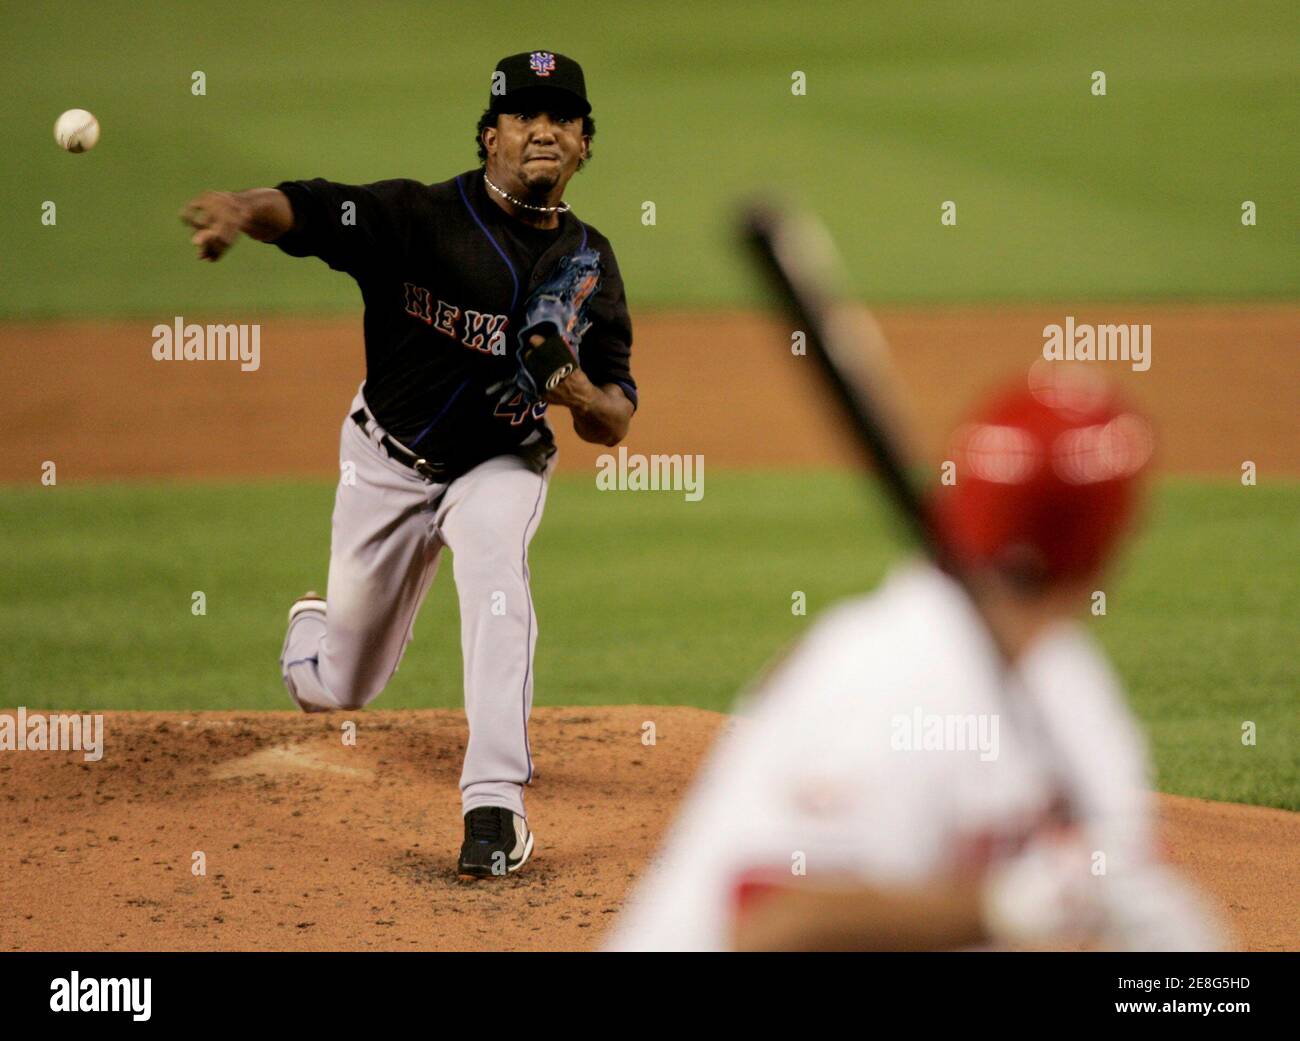 New York Mets starting pitcher Pedro Martinez (top) throws to Washington Nationals batter Ryan Zimmerman in the first inning of their MLB National League baseball game in Washington September 15, 2008.       REUTERS/Gary Cameron   (UNITED STATES) Stock Photo